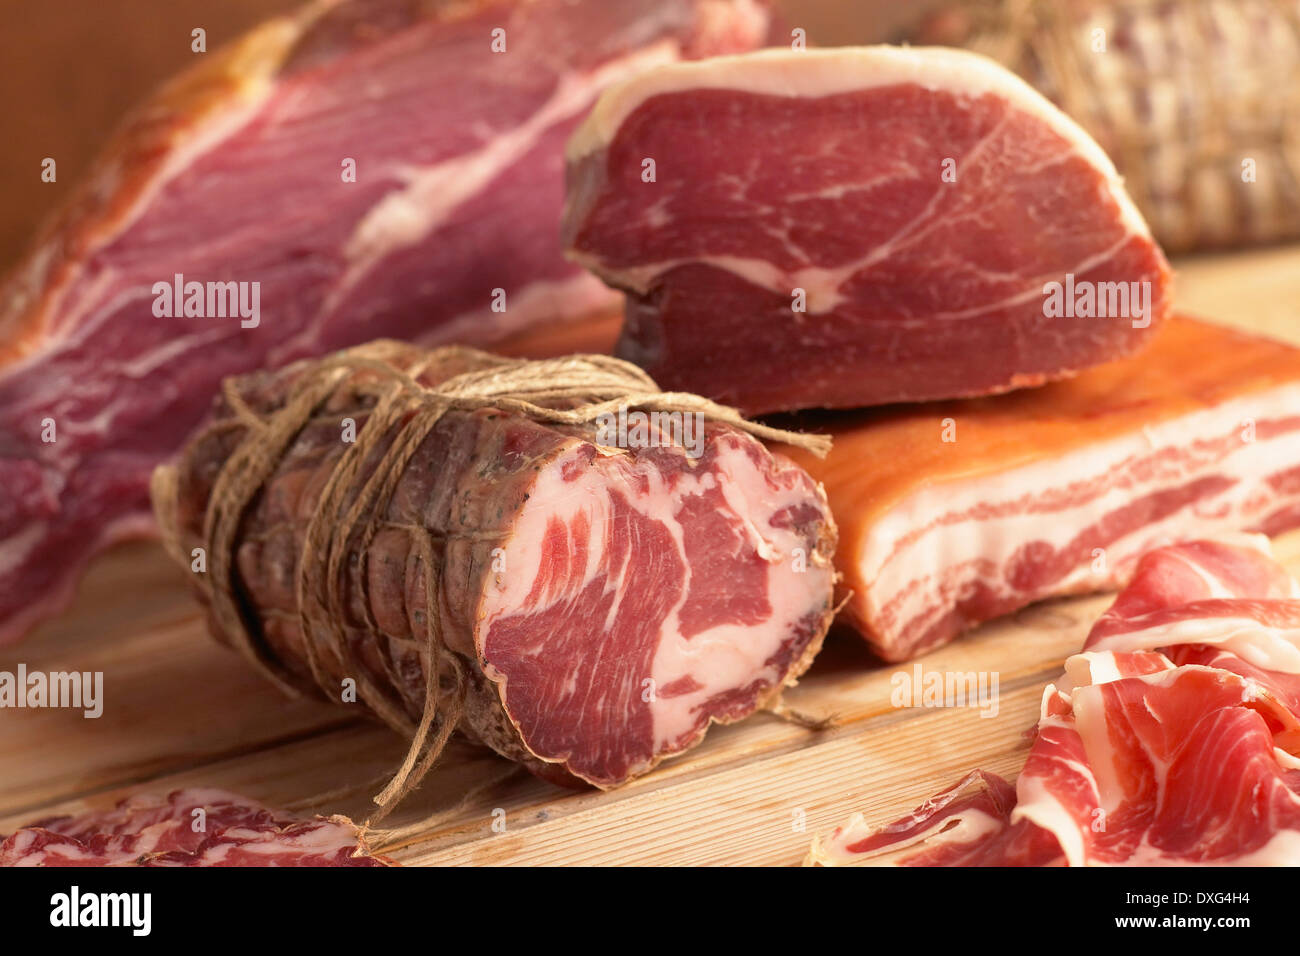 Display Of Cooked Meats In Charcuterie Stock Photo